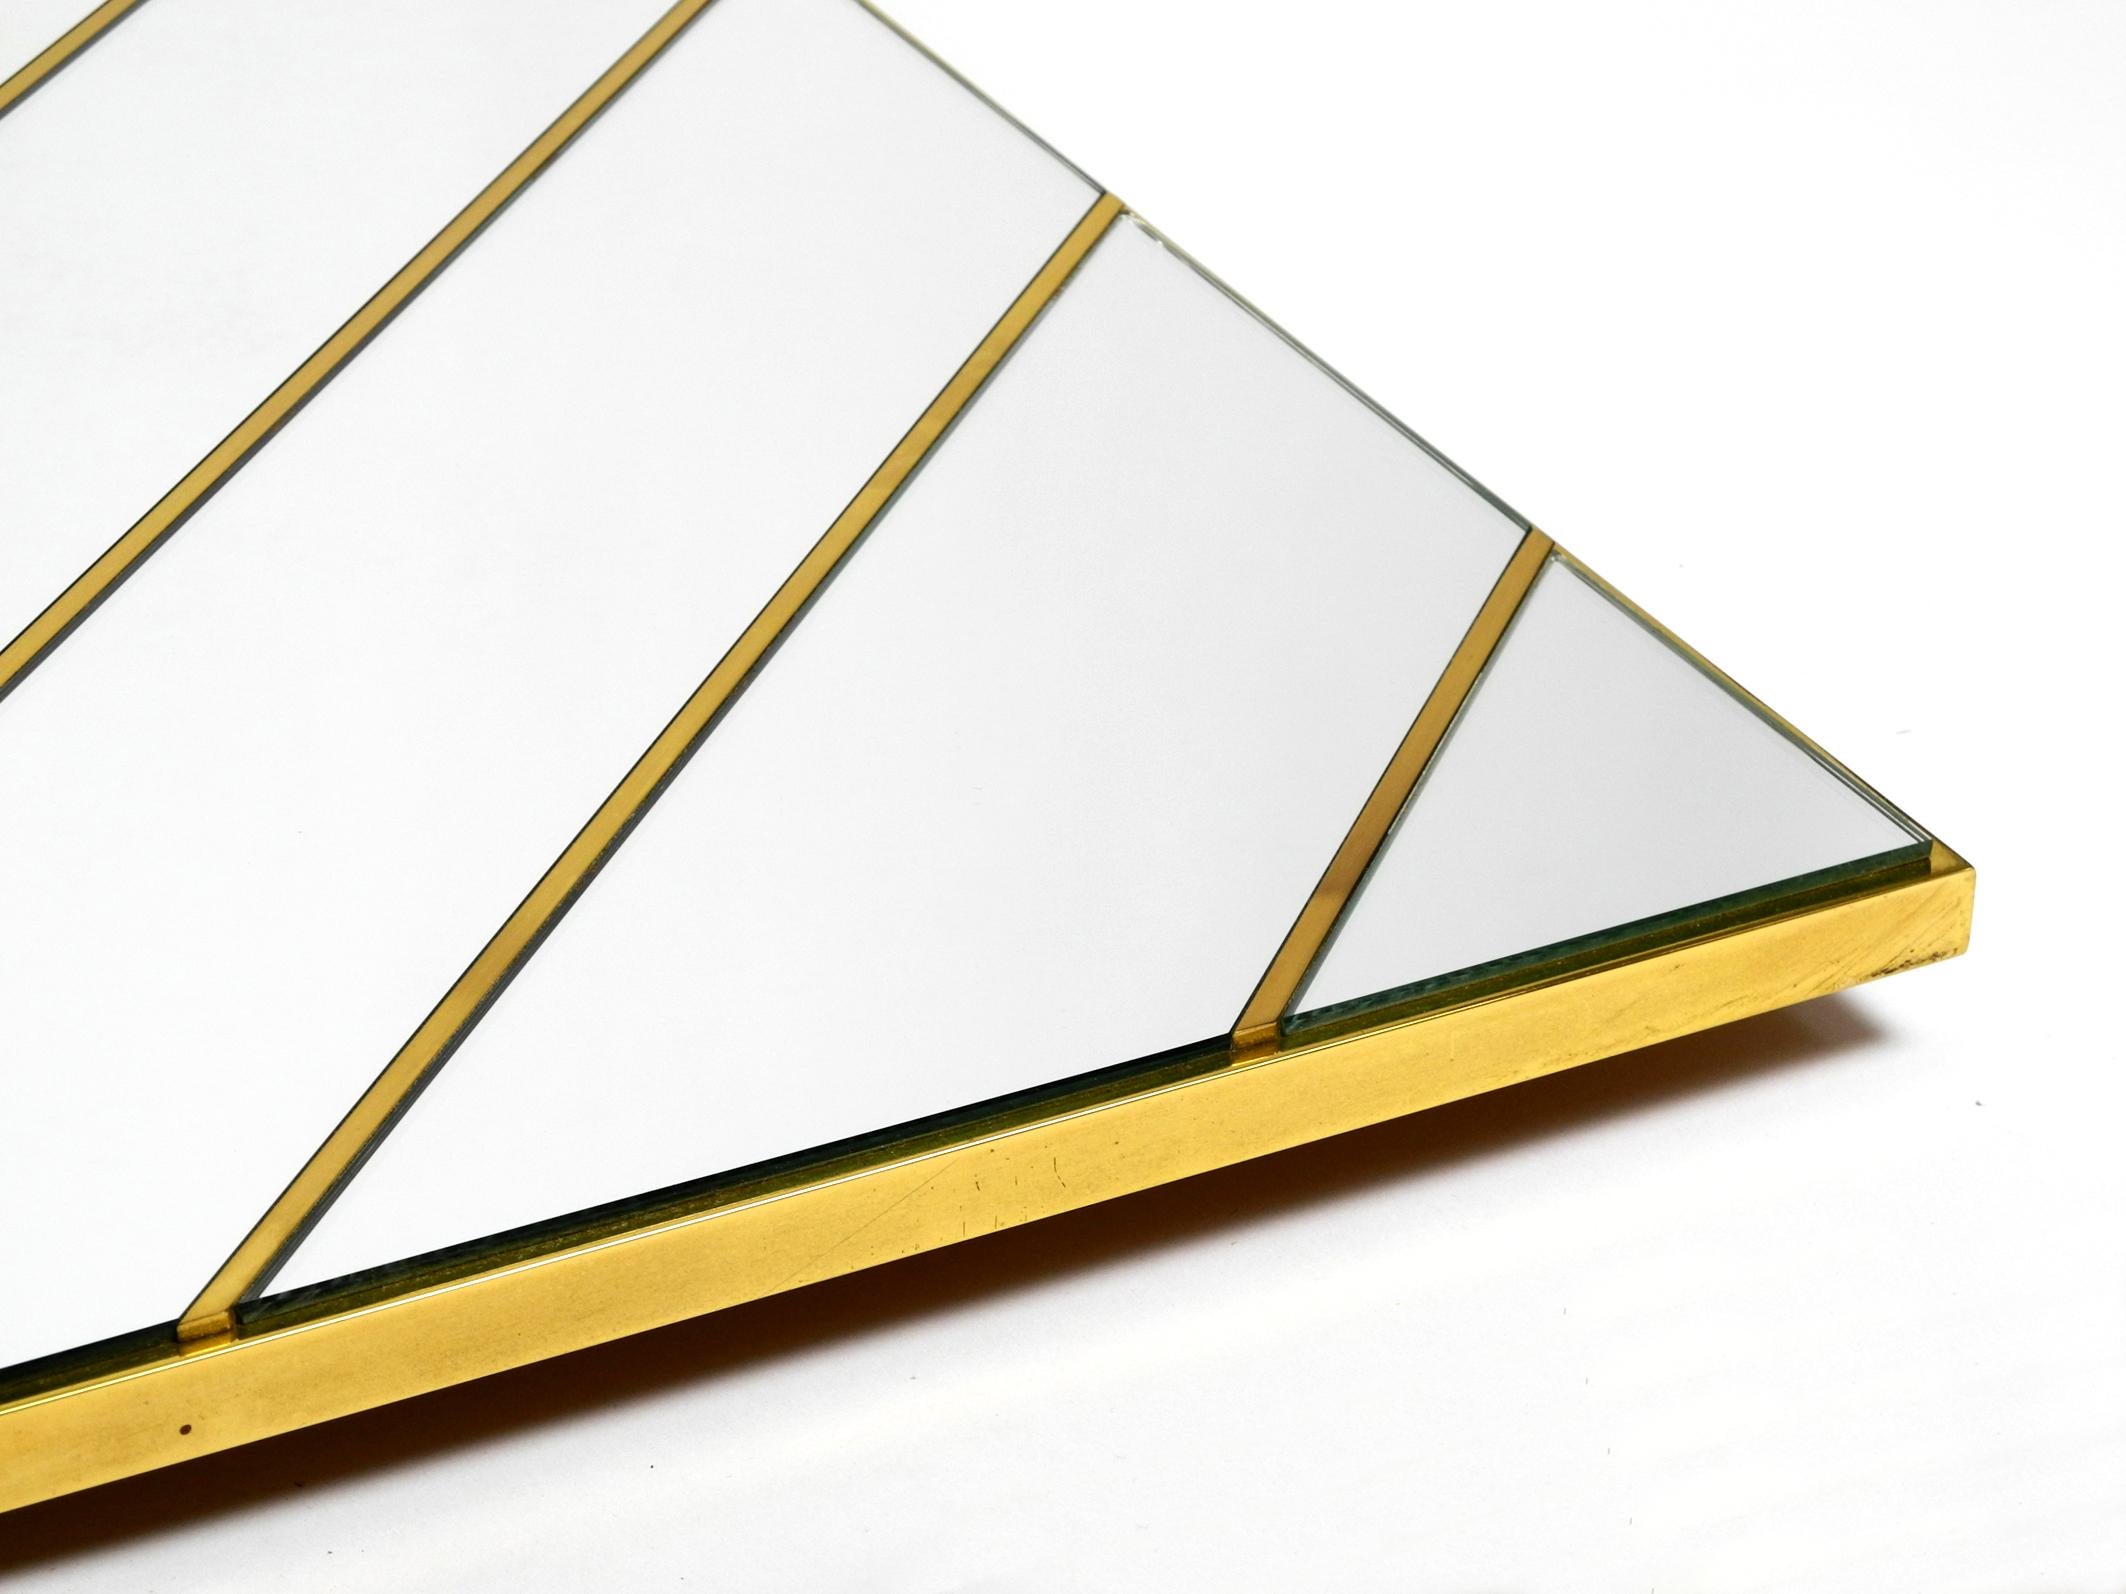 Large, Exceptional 1970s Brass Wall Mirror with Diagonal Mirror Strips For Sale 10